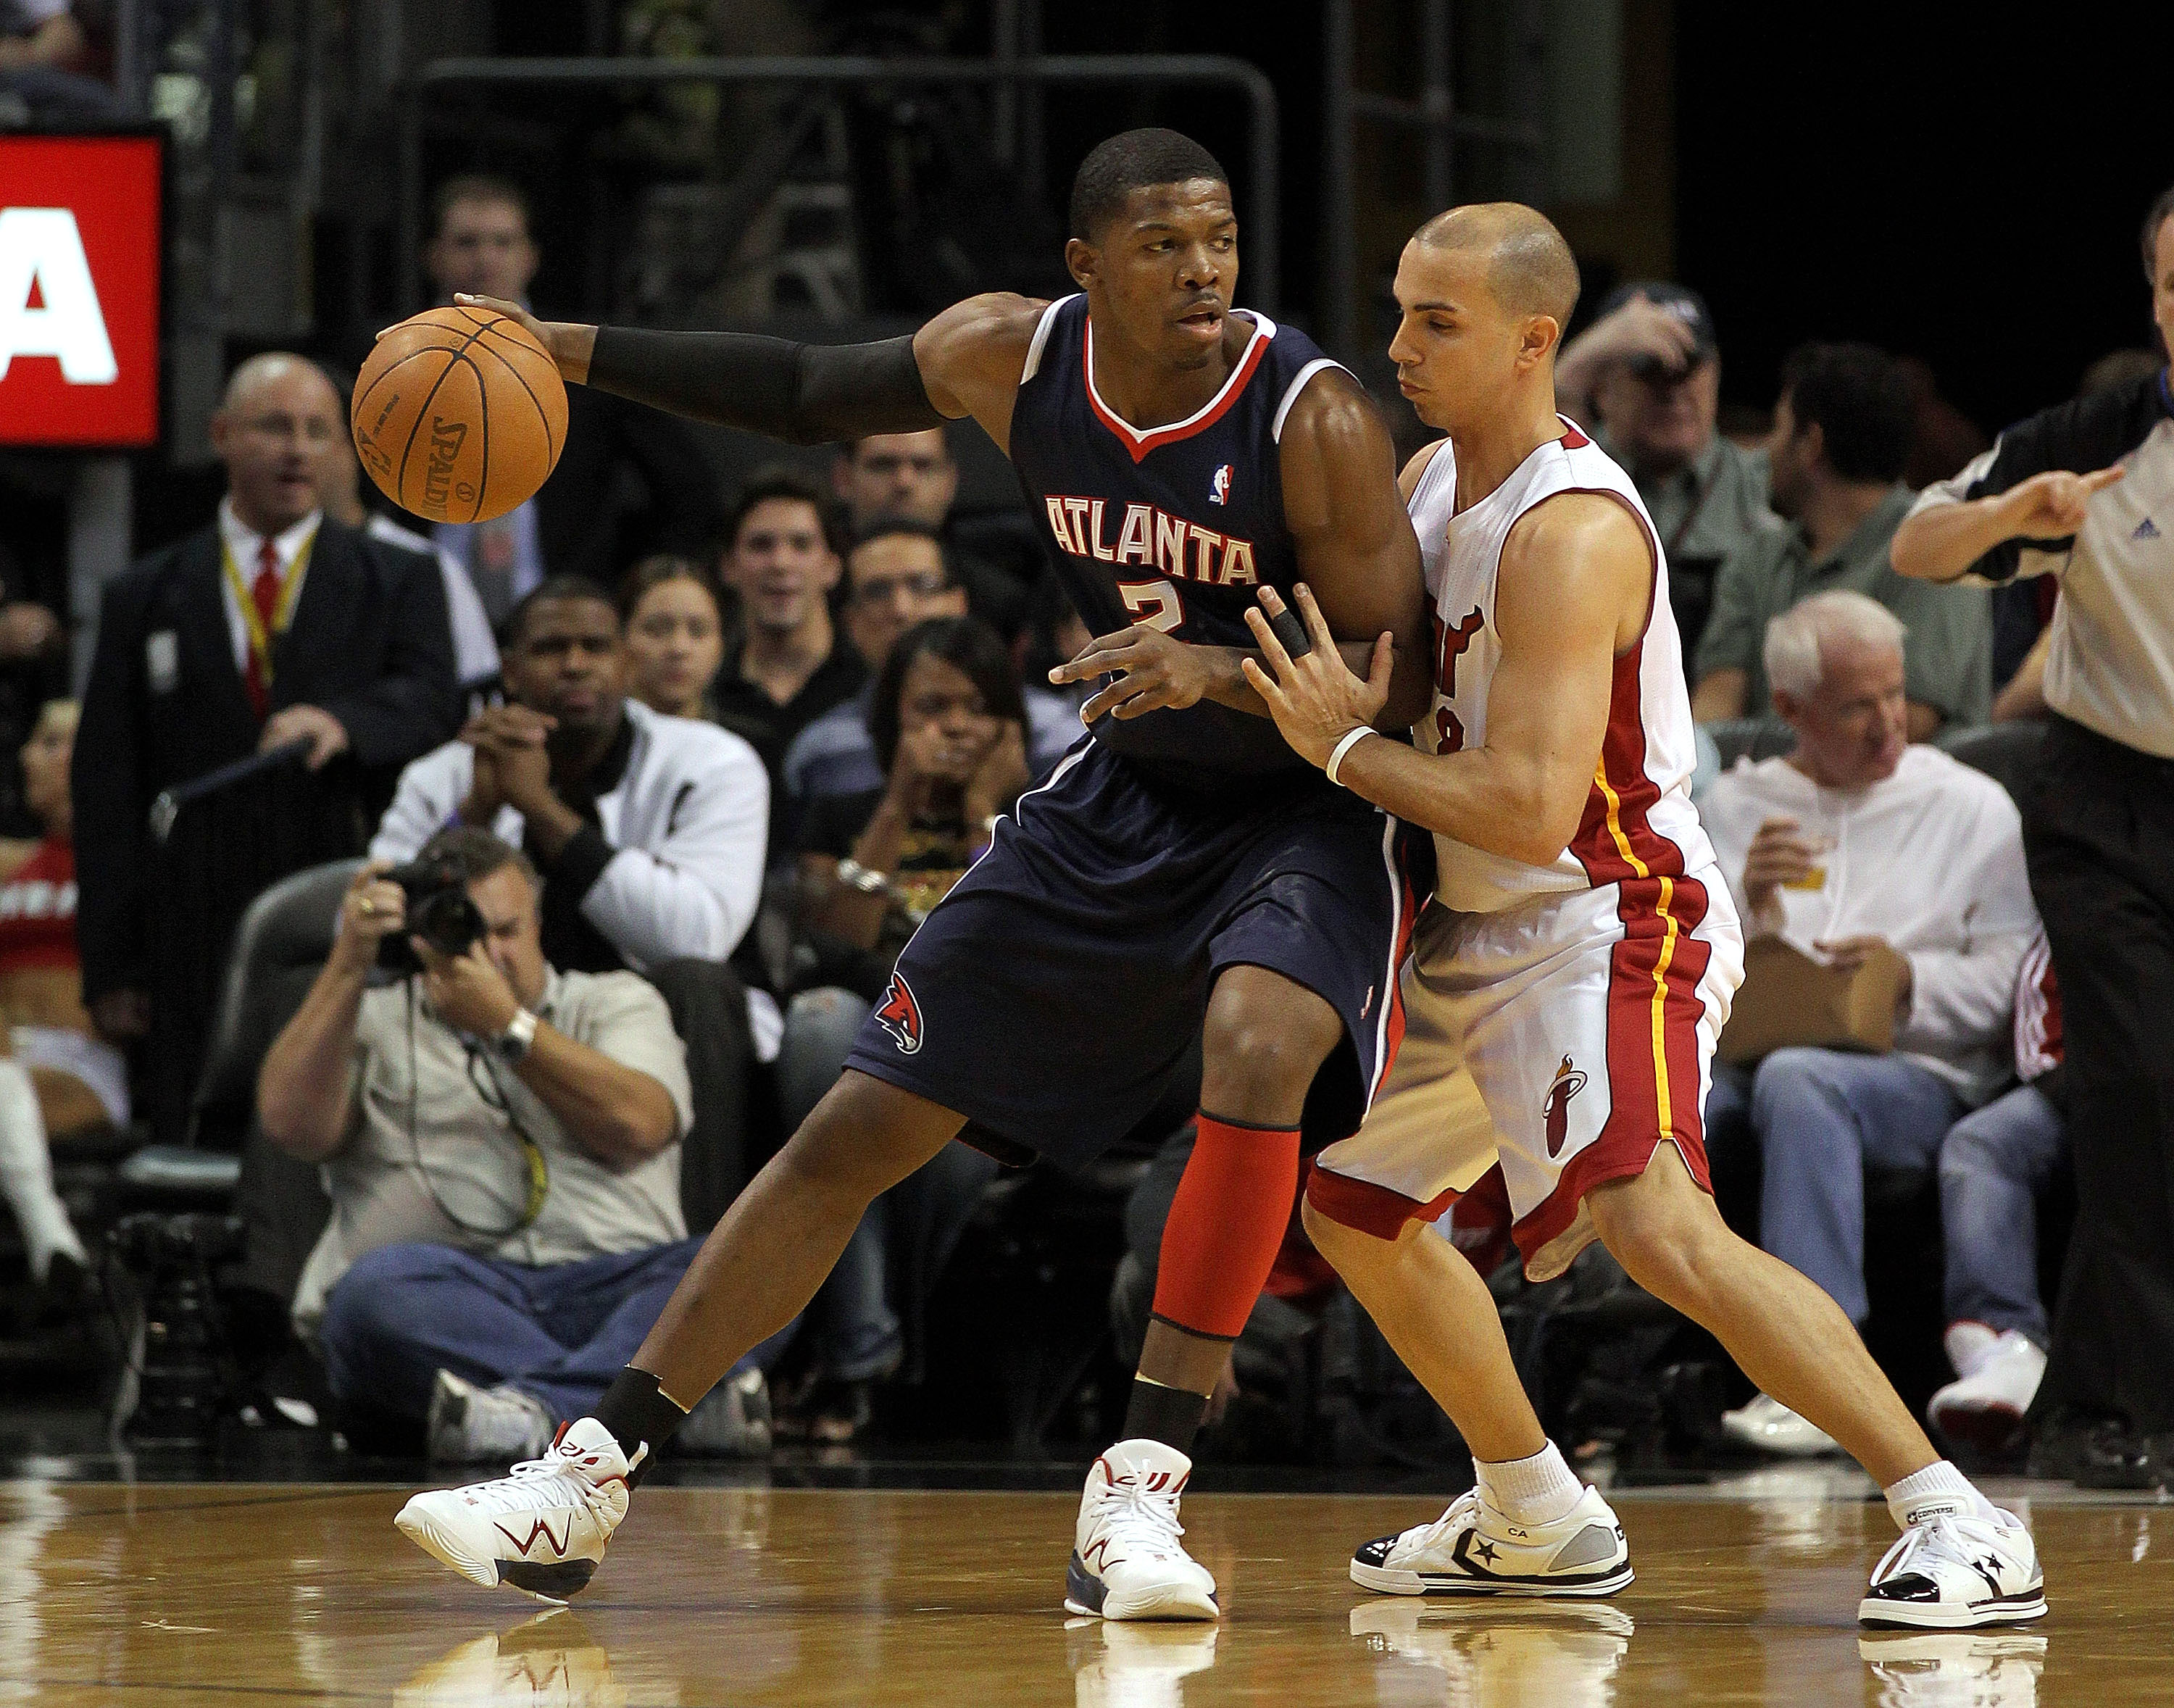 MIAMI, FL - JANUARY 18:  Joe Johnson #2 of the Atlanta Hawks posts up against Carlos Arroyo #8 of the Miami Heat during a game at American Airlines Arena on January 18, 2011 in Miami, Florida. NOTE TO USER: User expressly acknowledges and agrees that, by